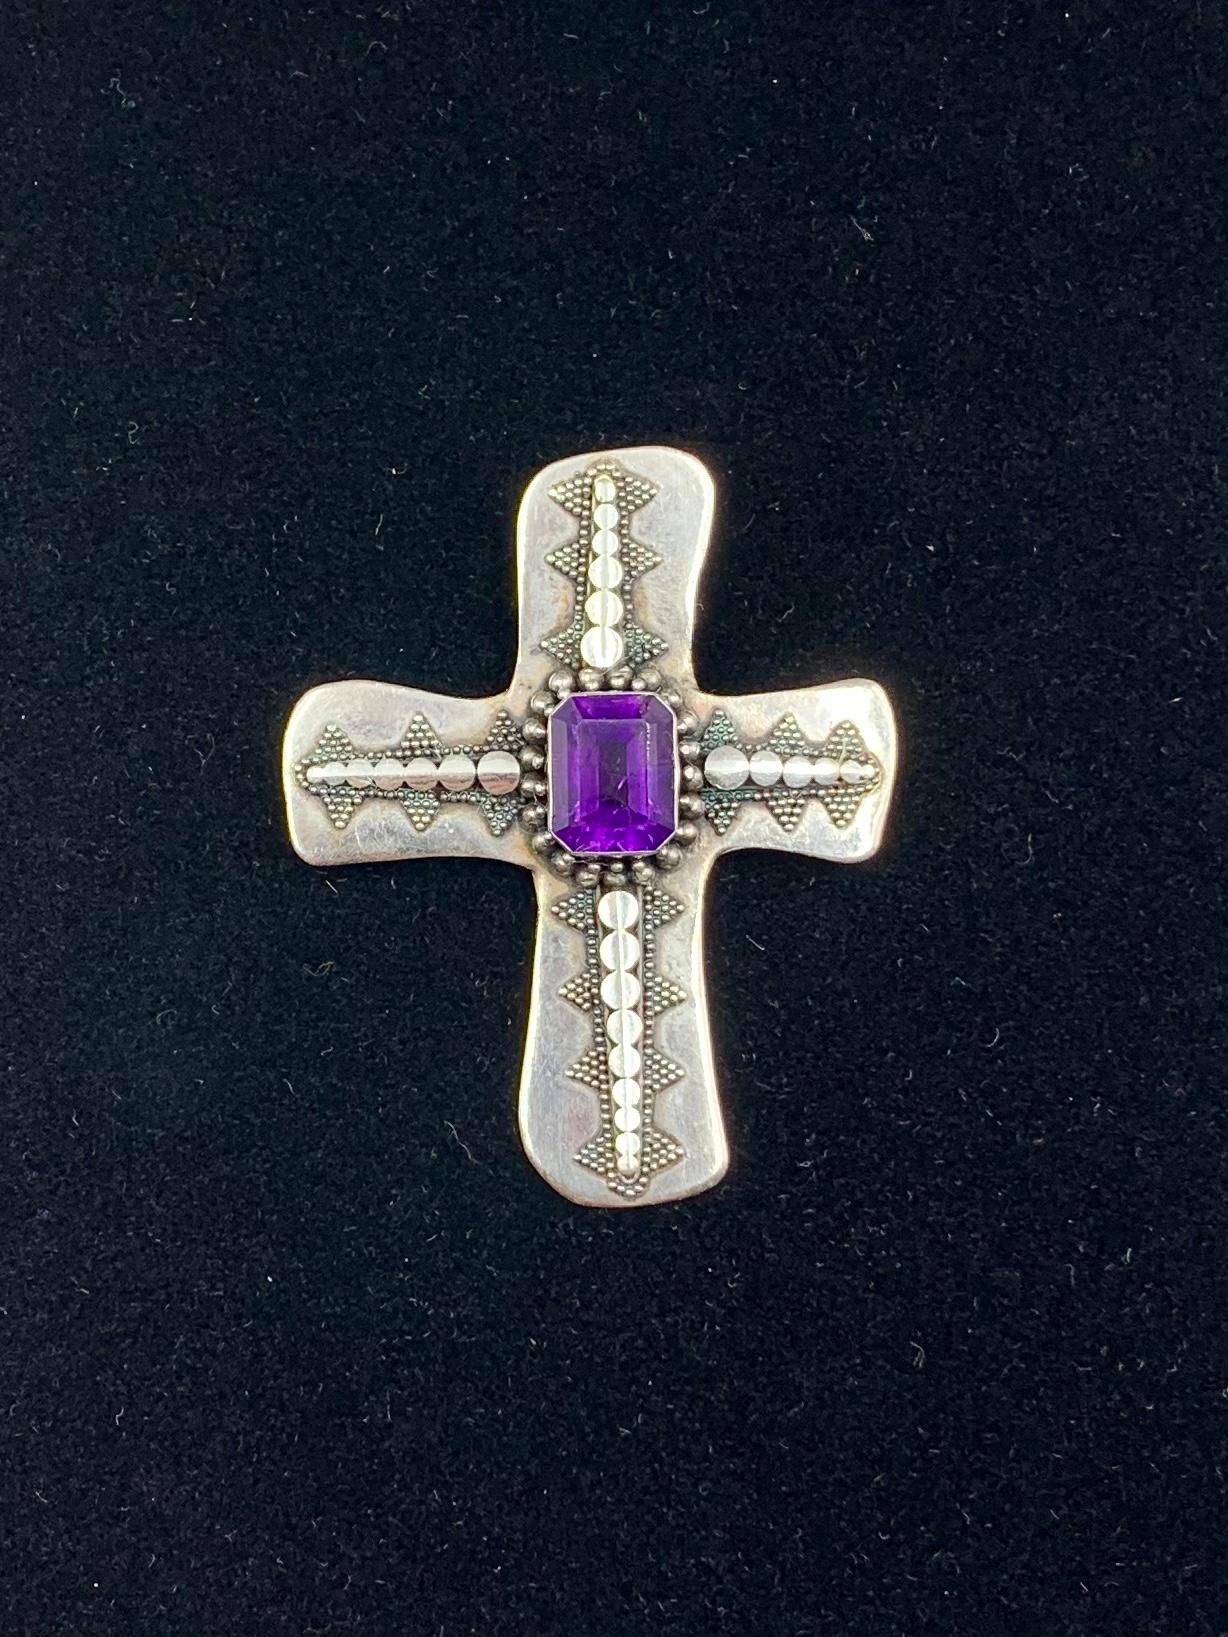 Fine antique sterling silver Byzantine style hand crafted organically shaped cross pendant with a rectangular amethyst center framed by two rows of granulation work, the arms decorated with a beautifully detailed pattern of graduated circles and